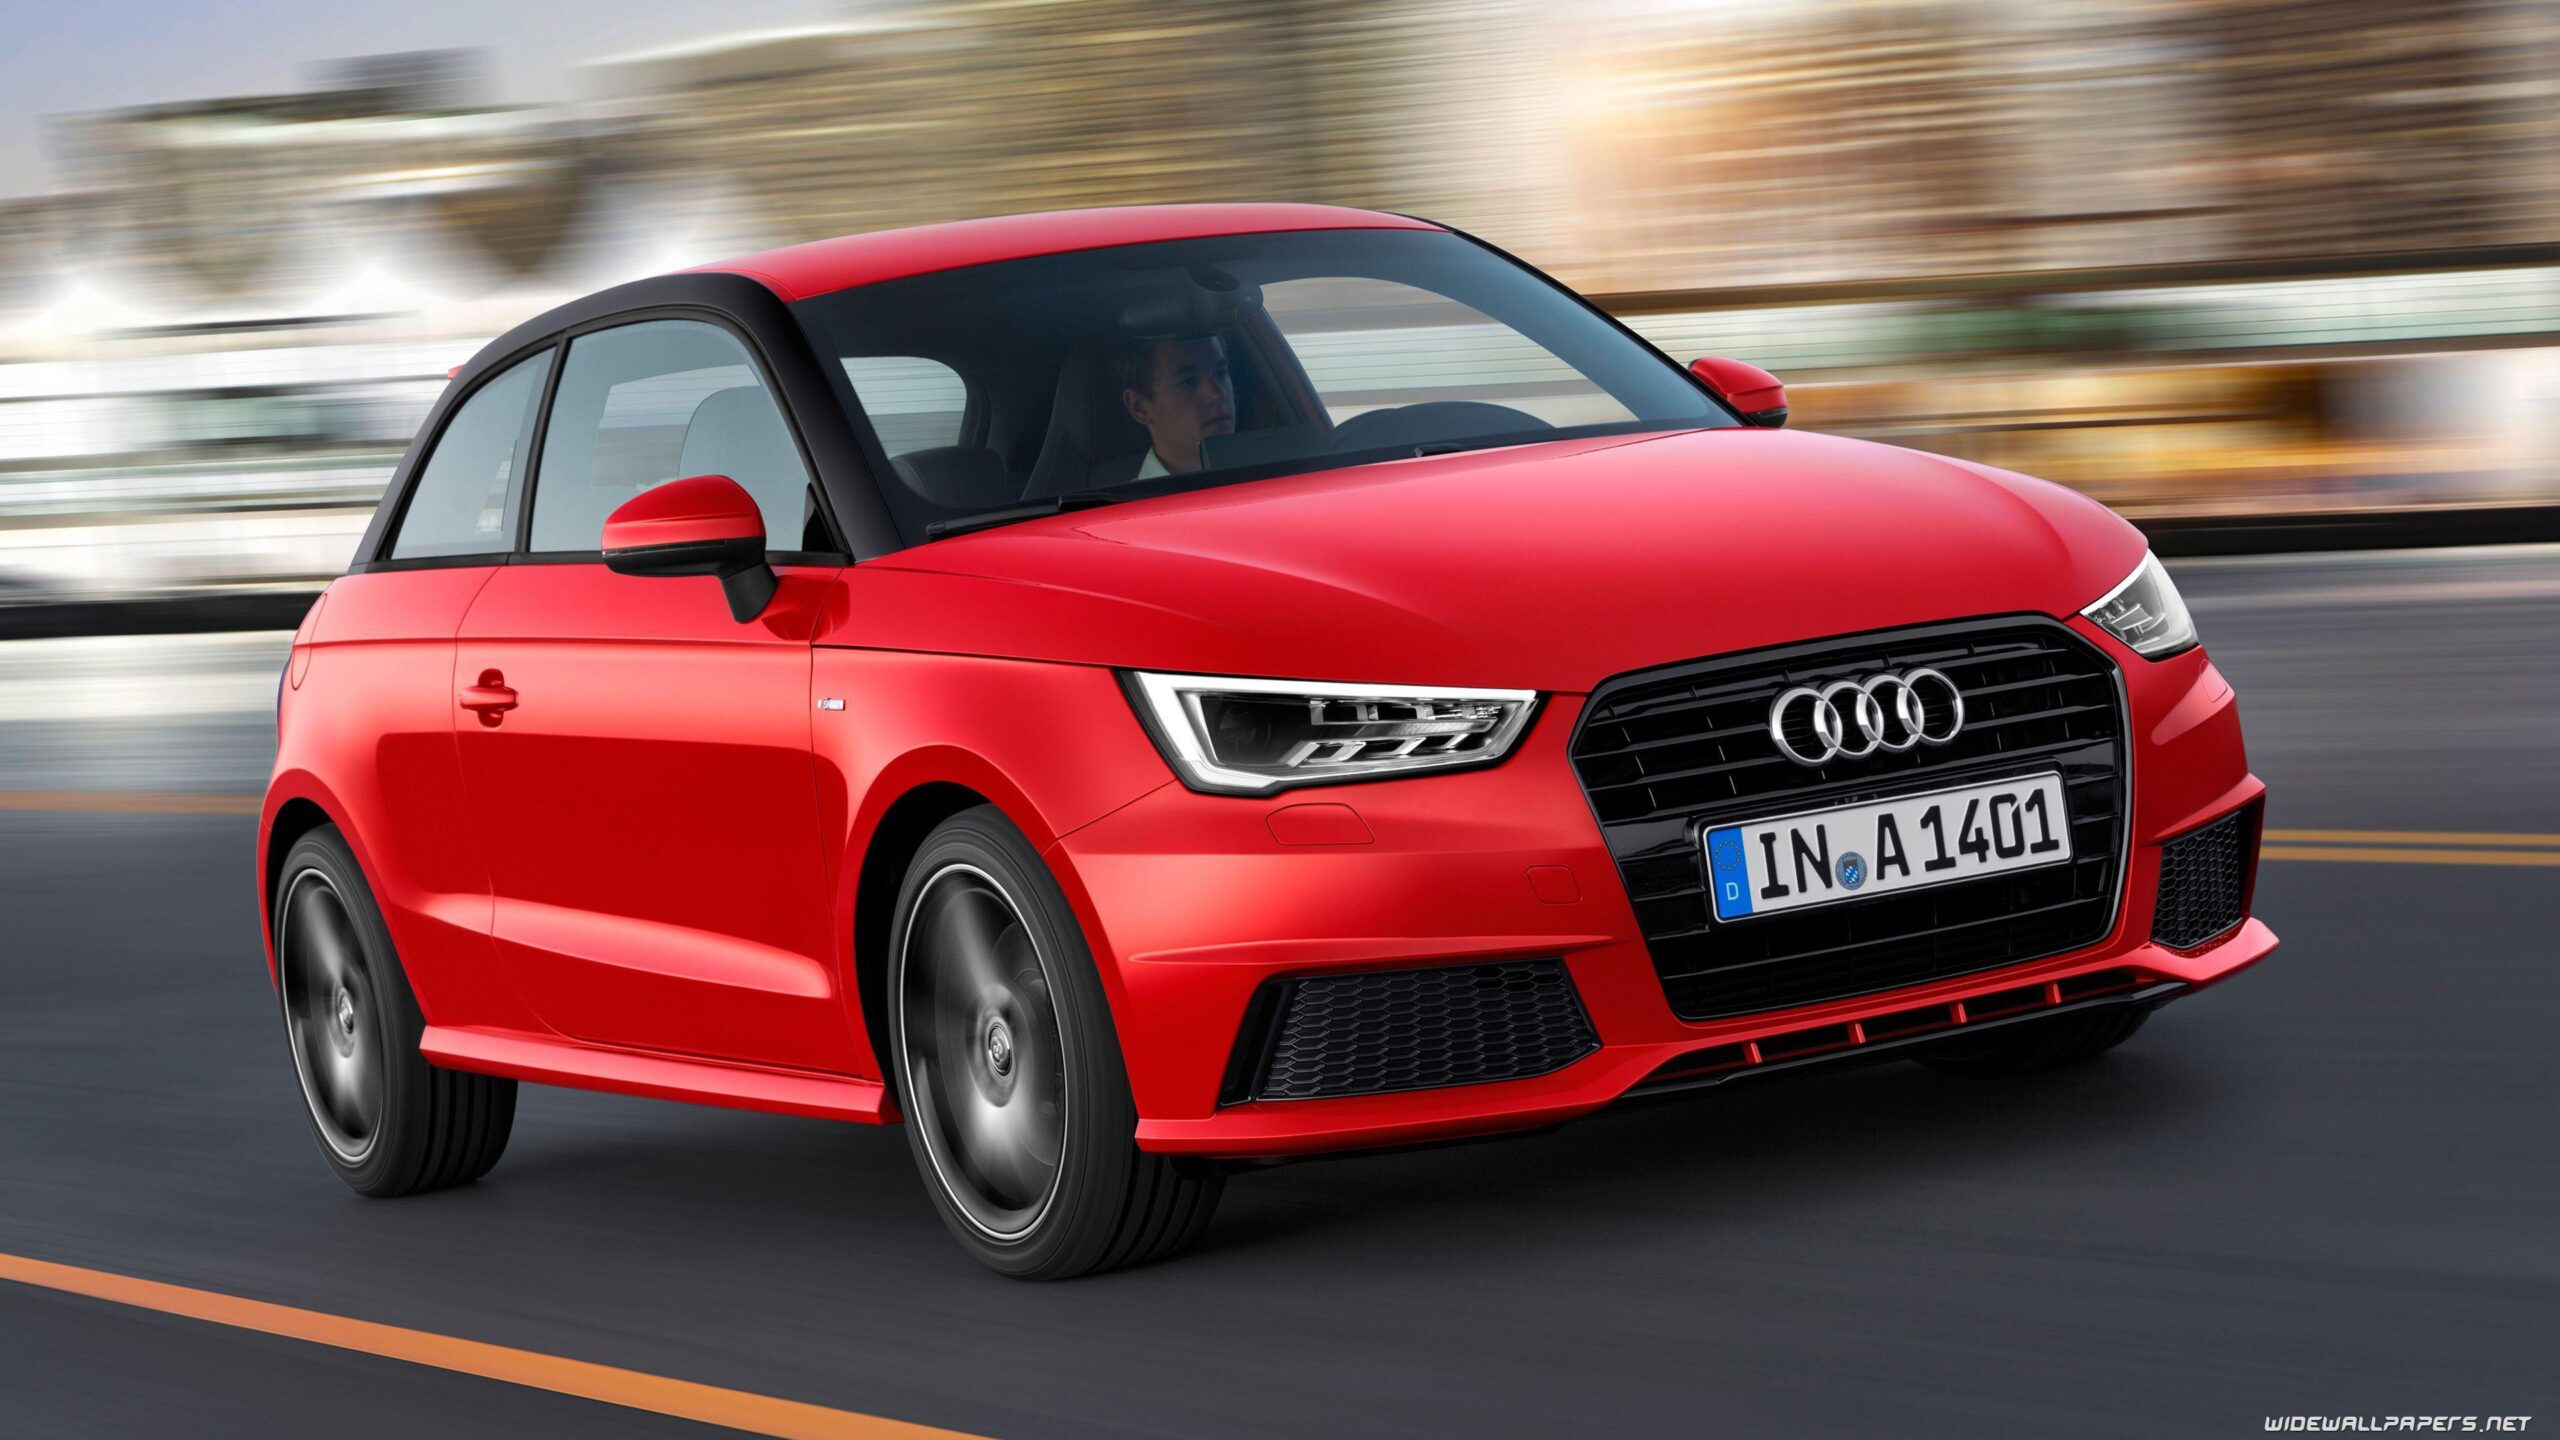 Audi A1 Hd Wallpapers For Laptop